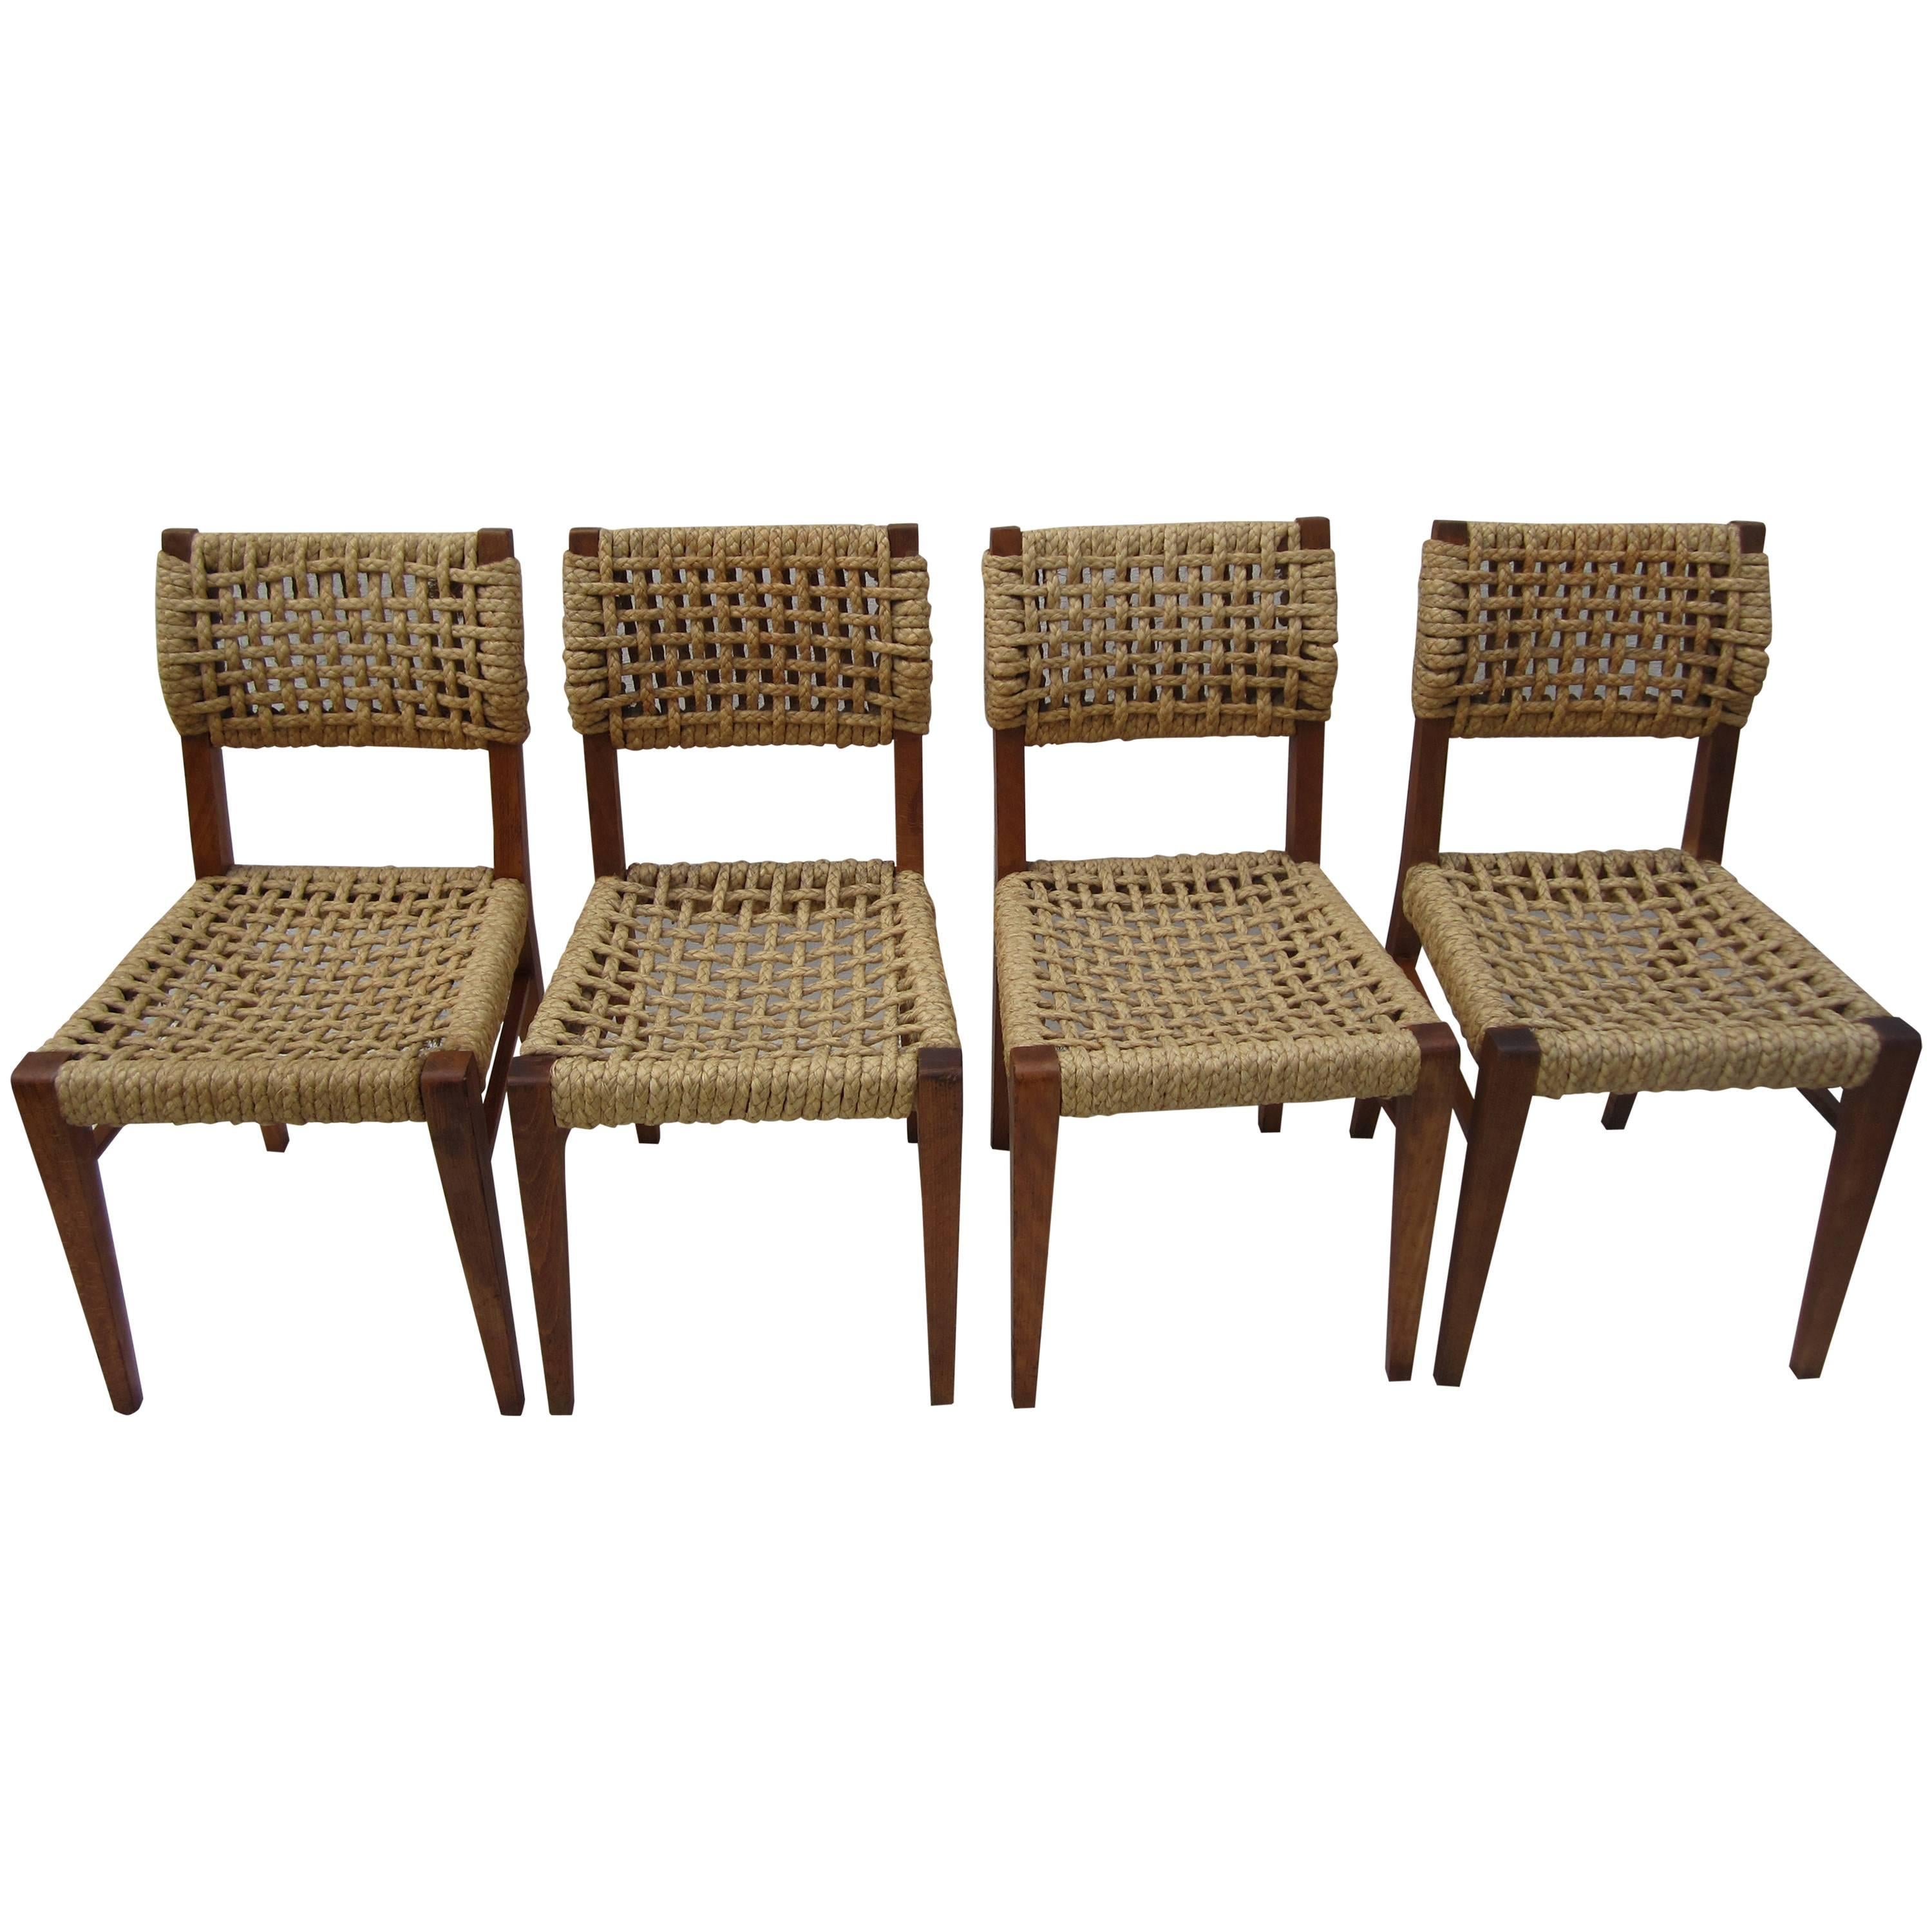 Set of Four Side or Dining Chairs by Audoux-Minet